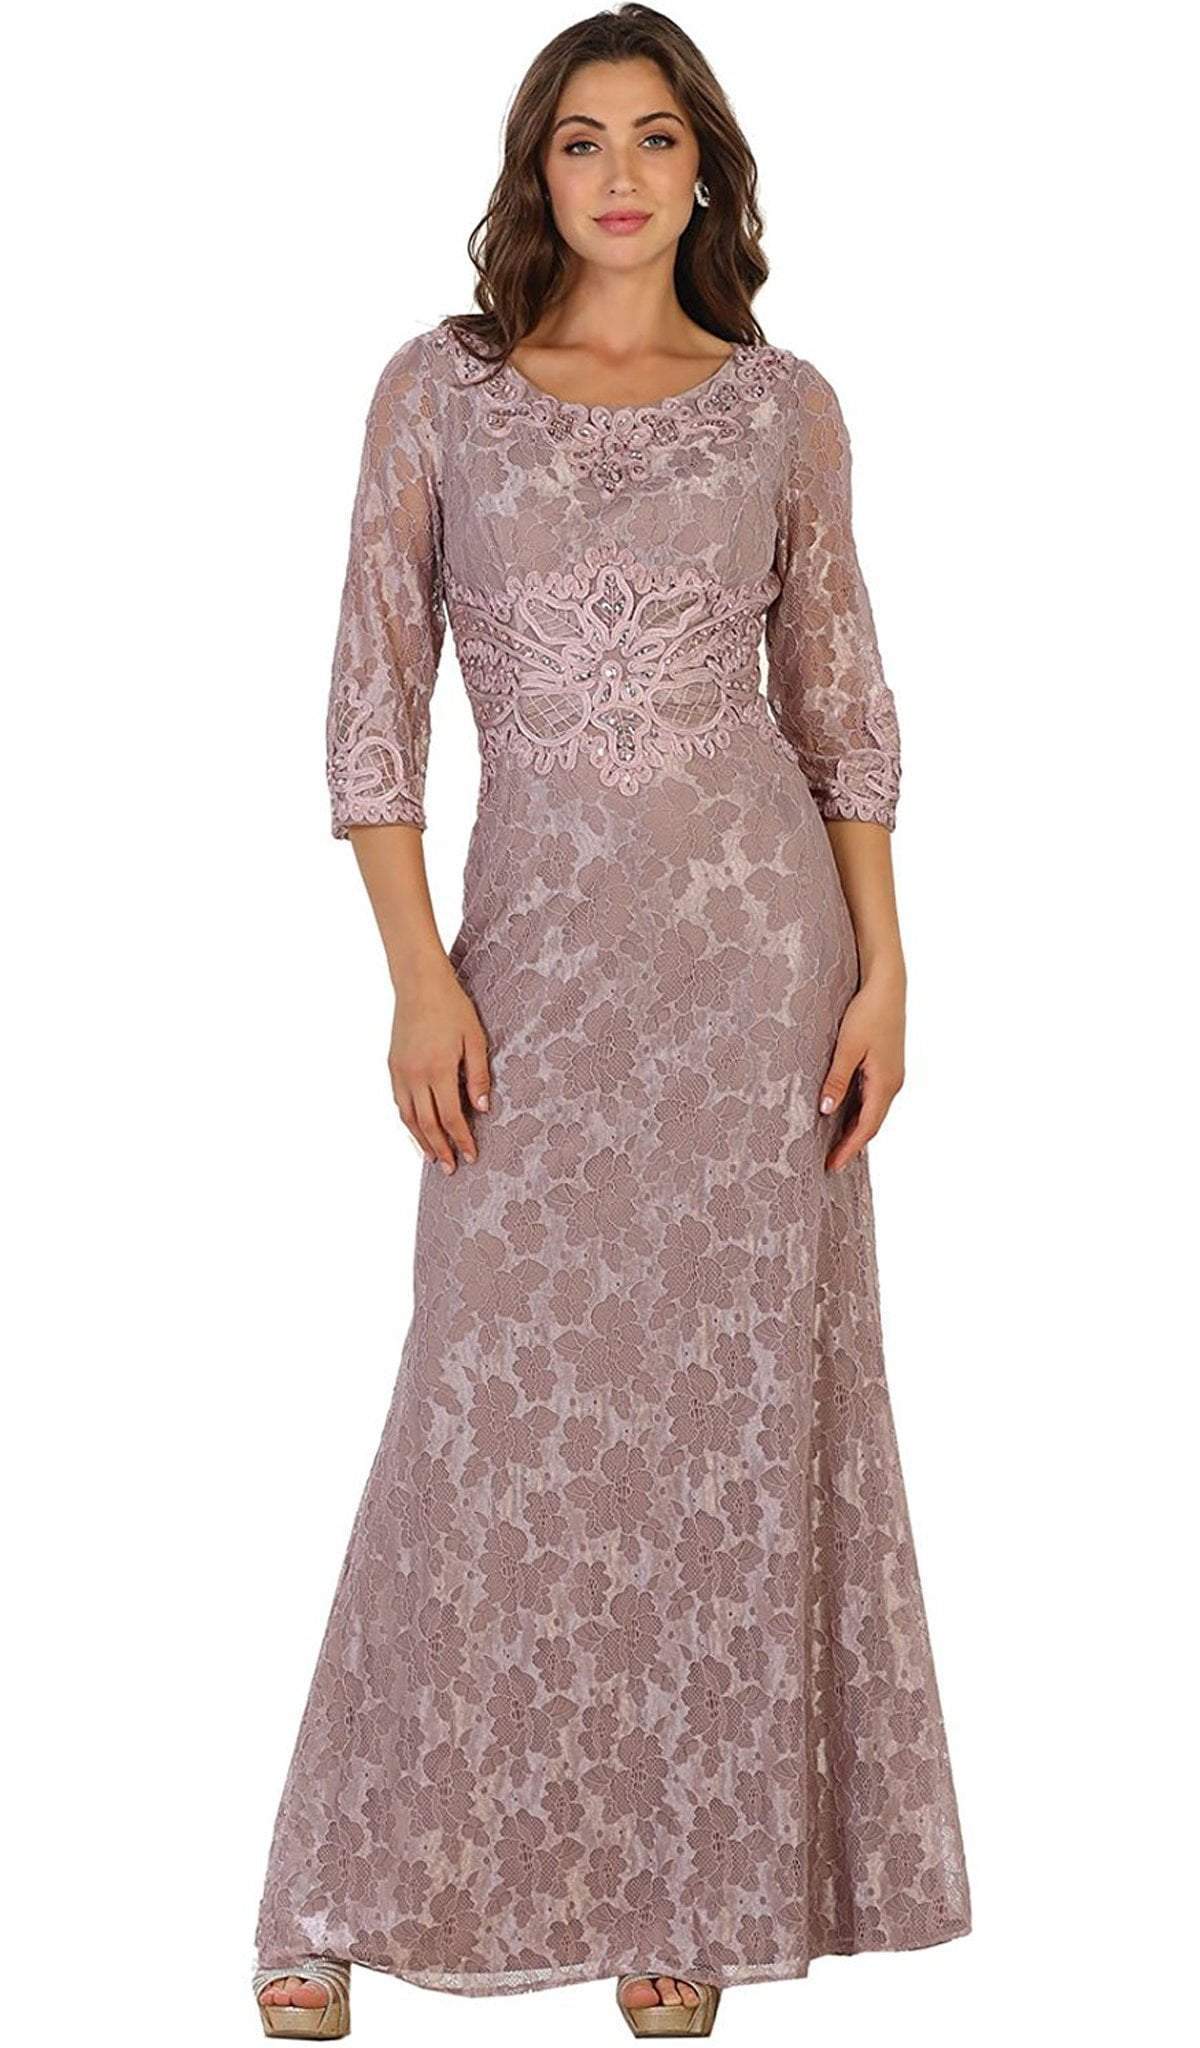 May Queen - Quarter Length Sleeve Lace Evening Dress Special Occasion Dress M / Mauve